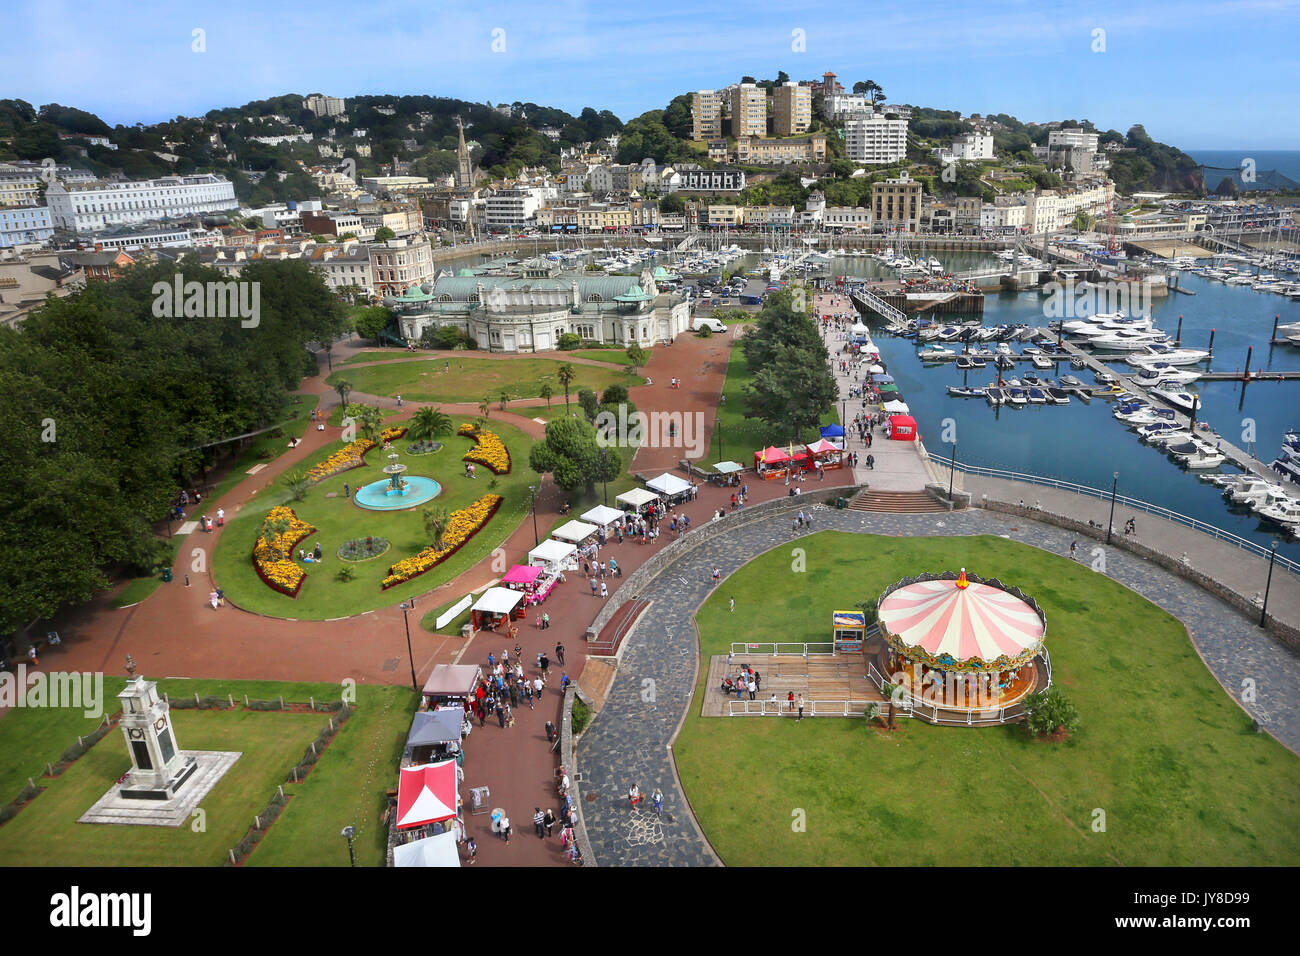 View of the harbourside and marina at Torquay, Devon, UK Stock Photo